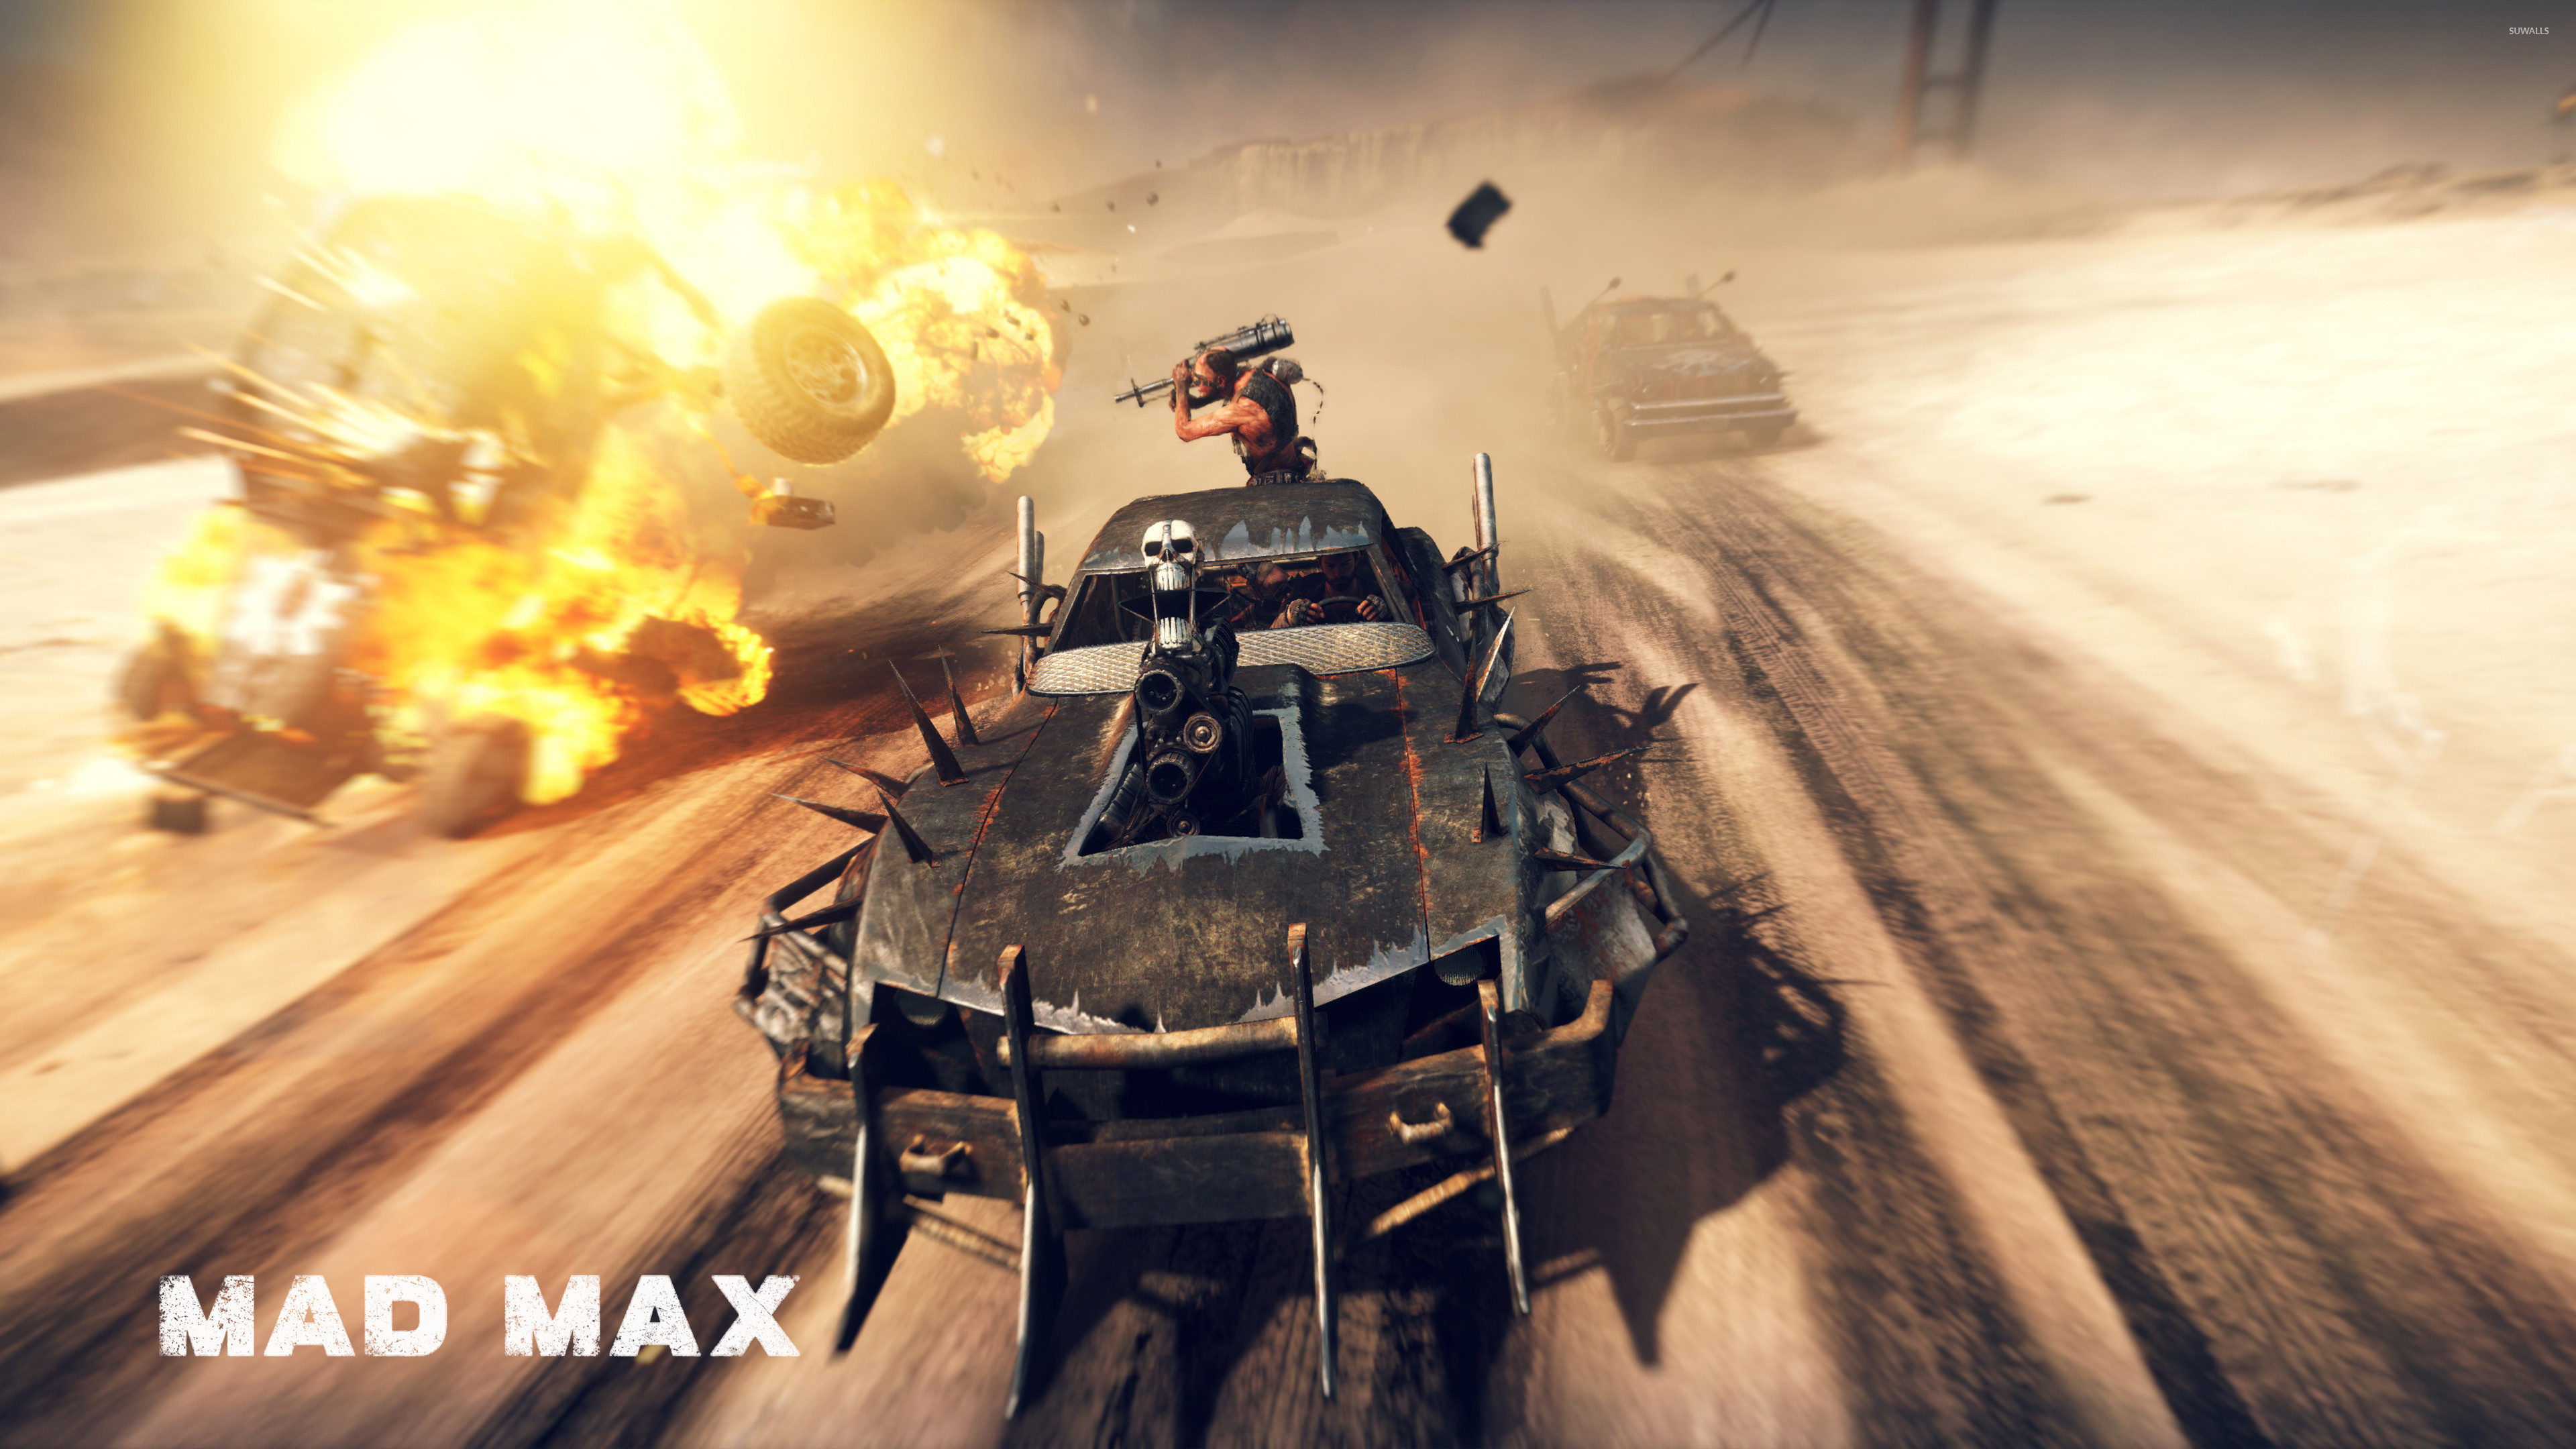 3840x2160 Furnace in Mad Max wallpaper